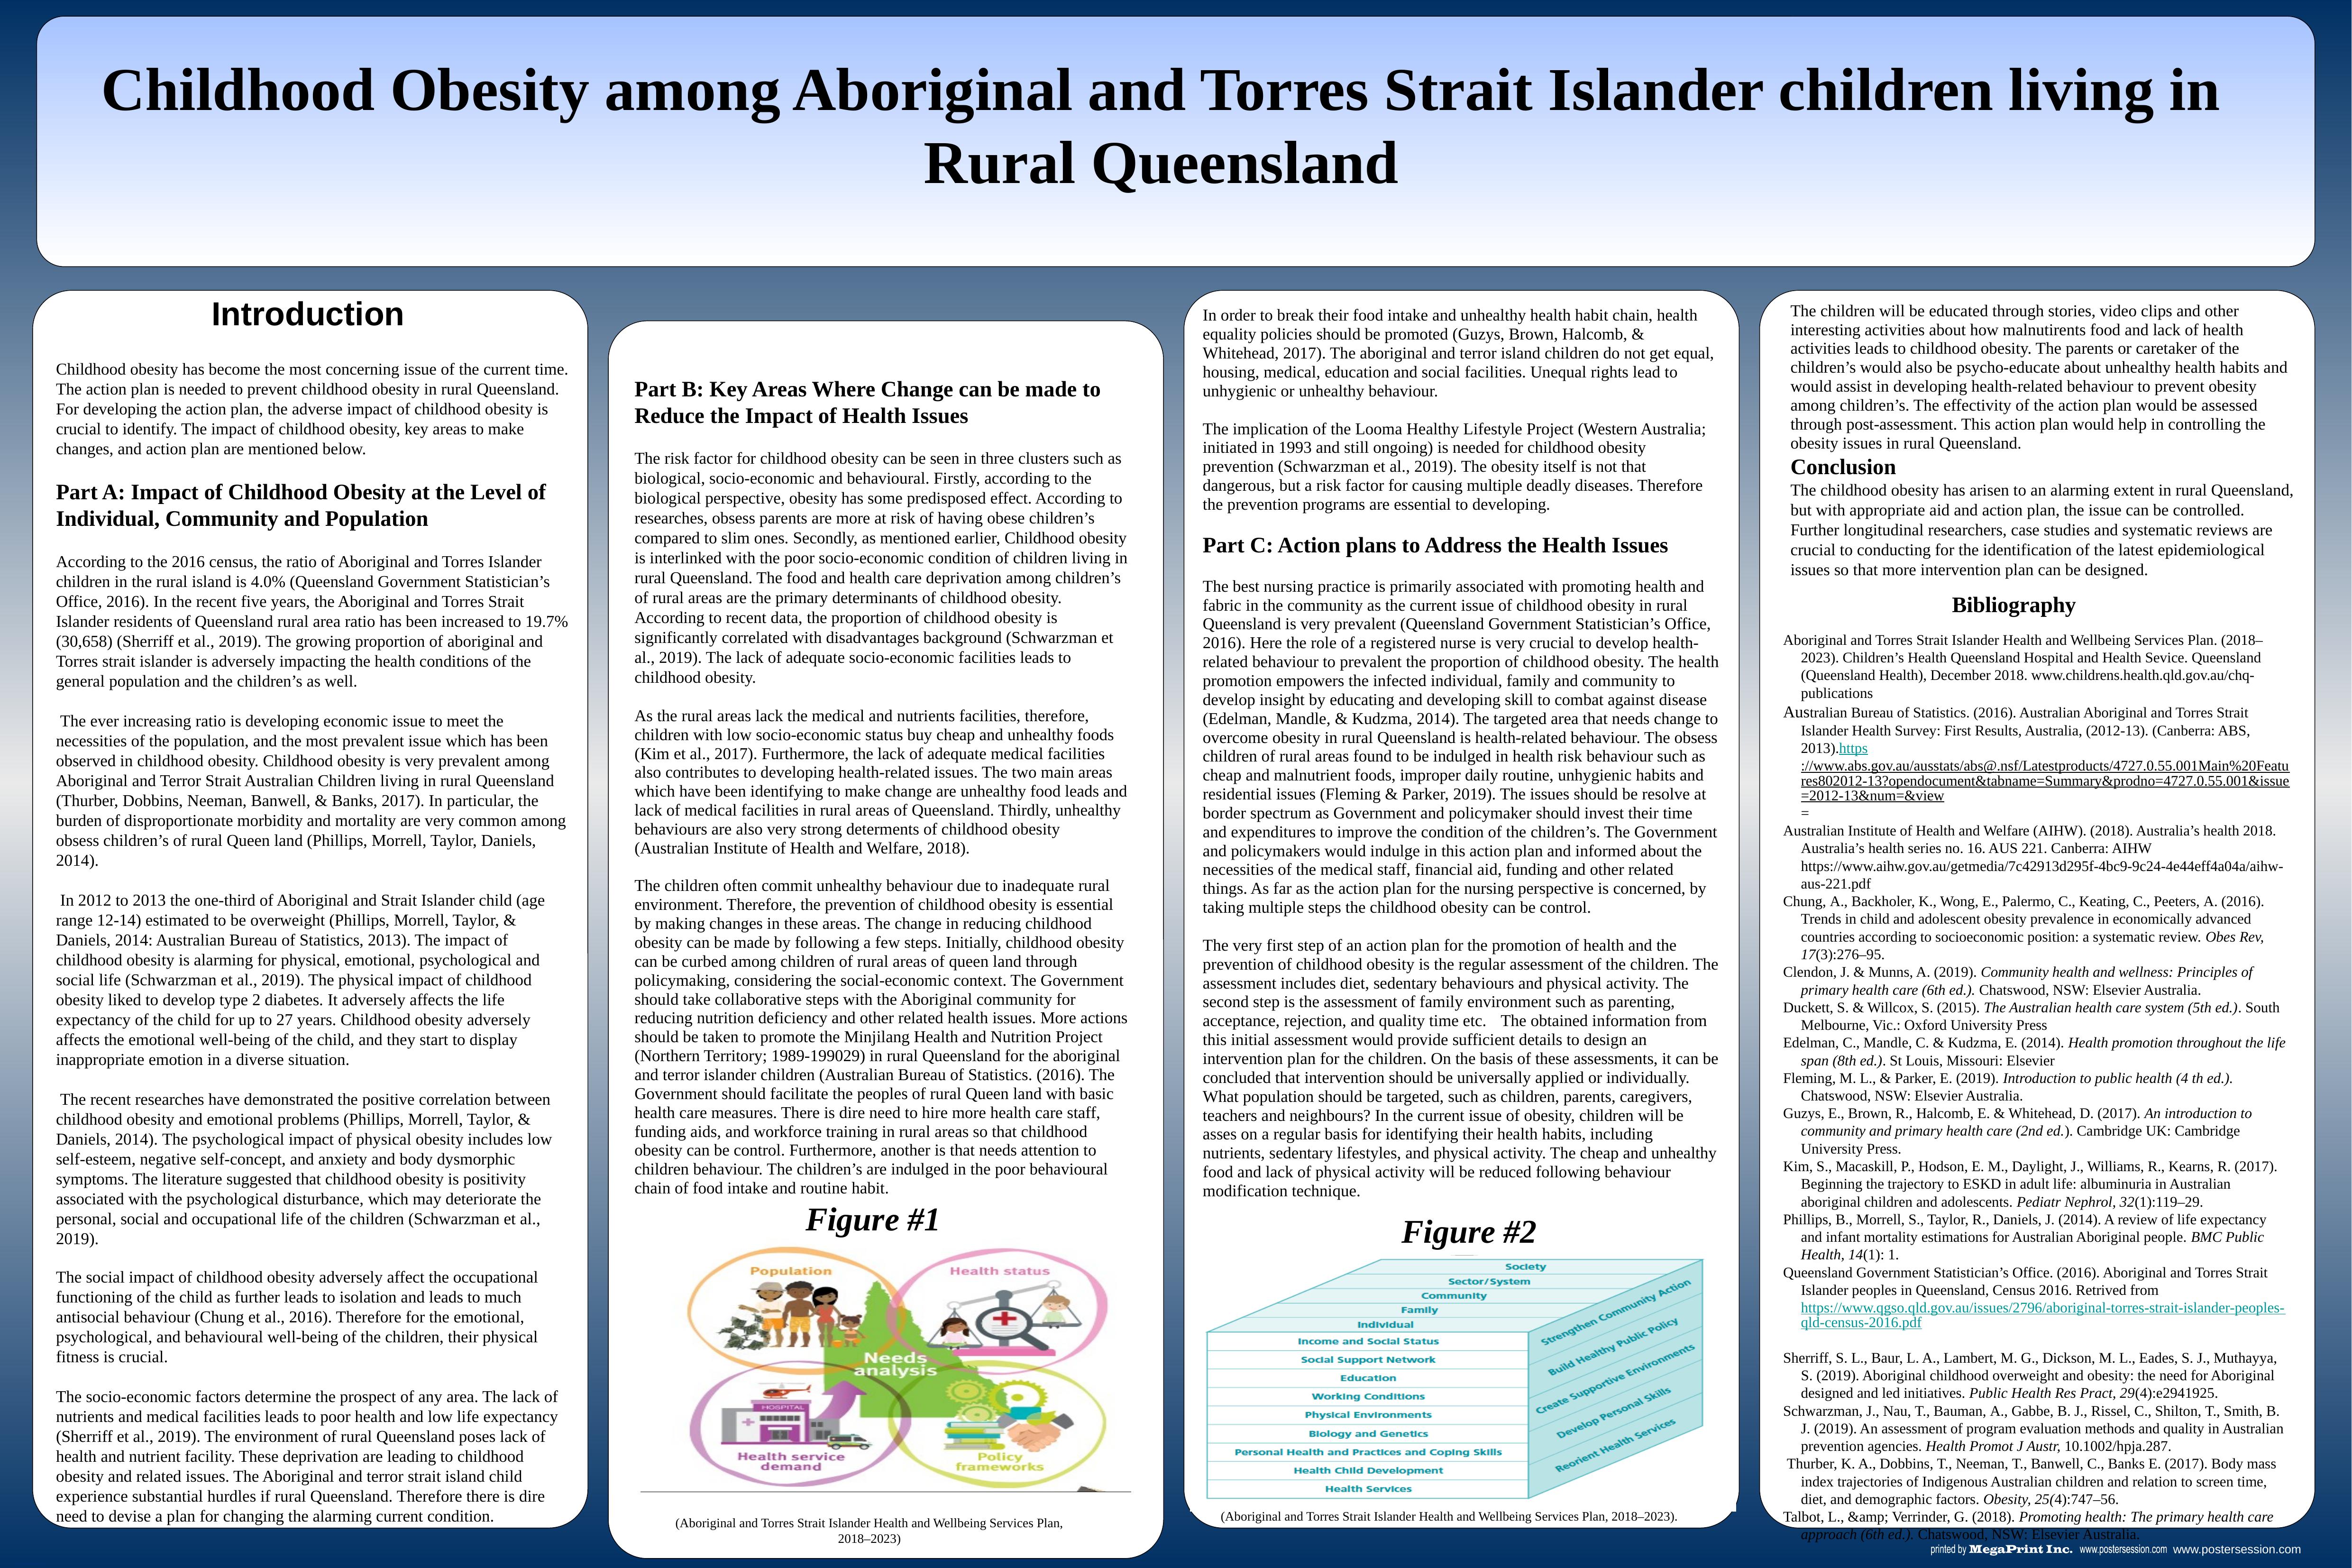 Childhood obesity has become the most concerning issue_1